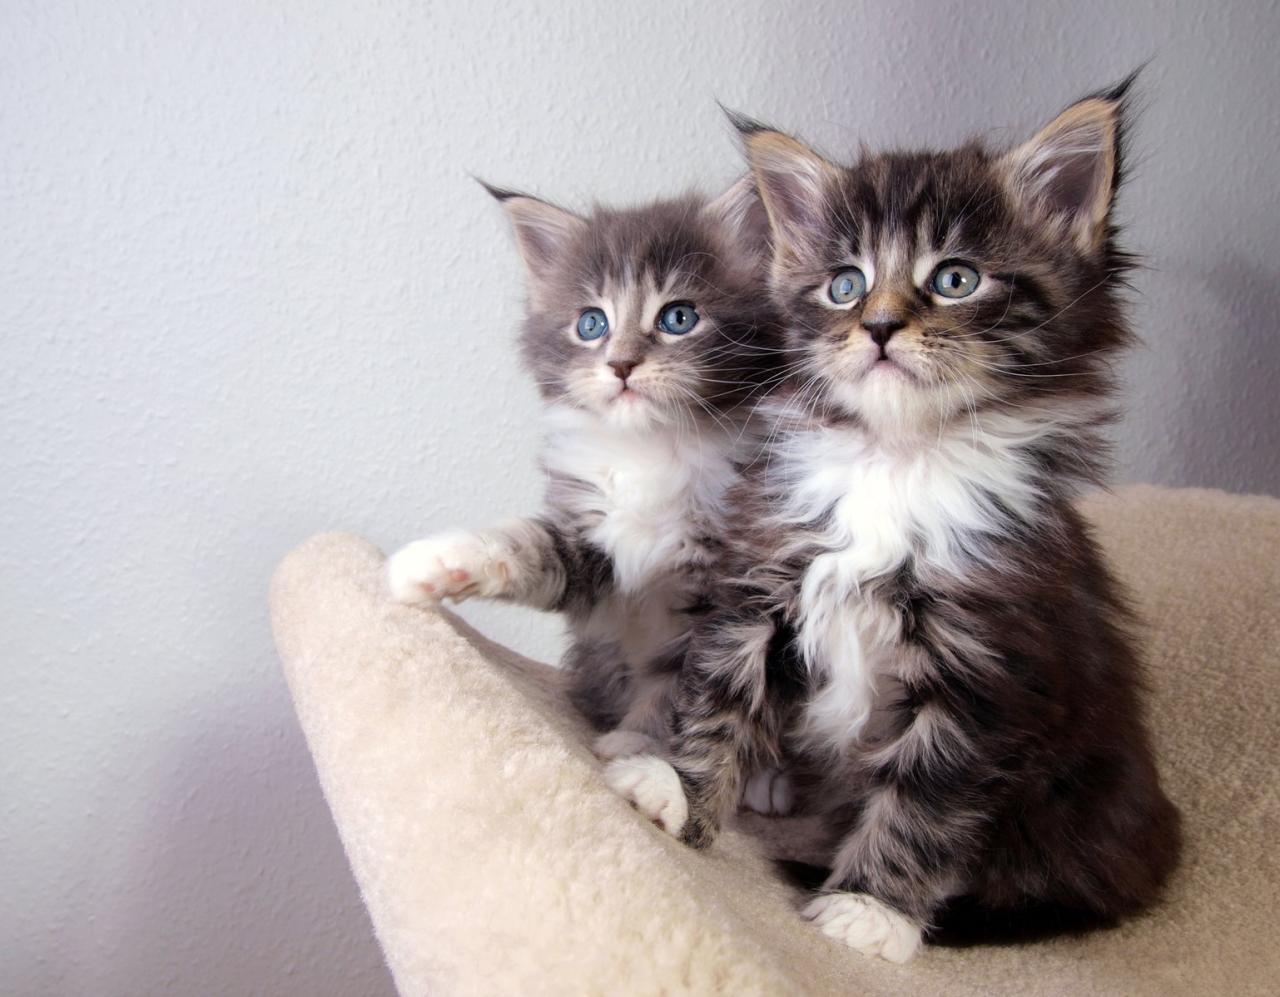 Maine coon kittens cute kitten coons cutest adorable destroy wondering ll just now